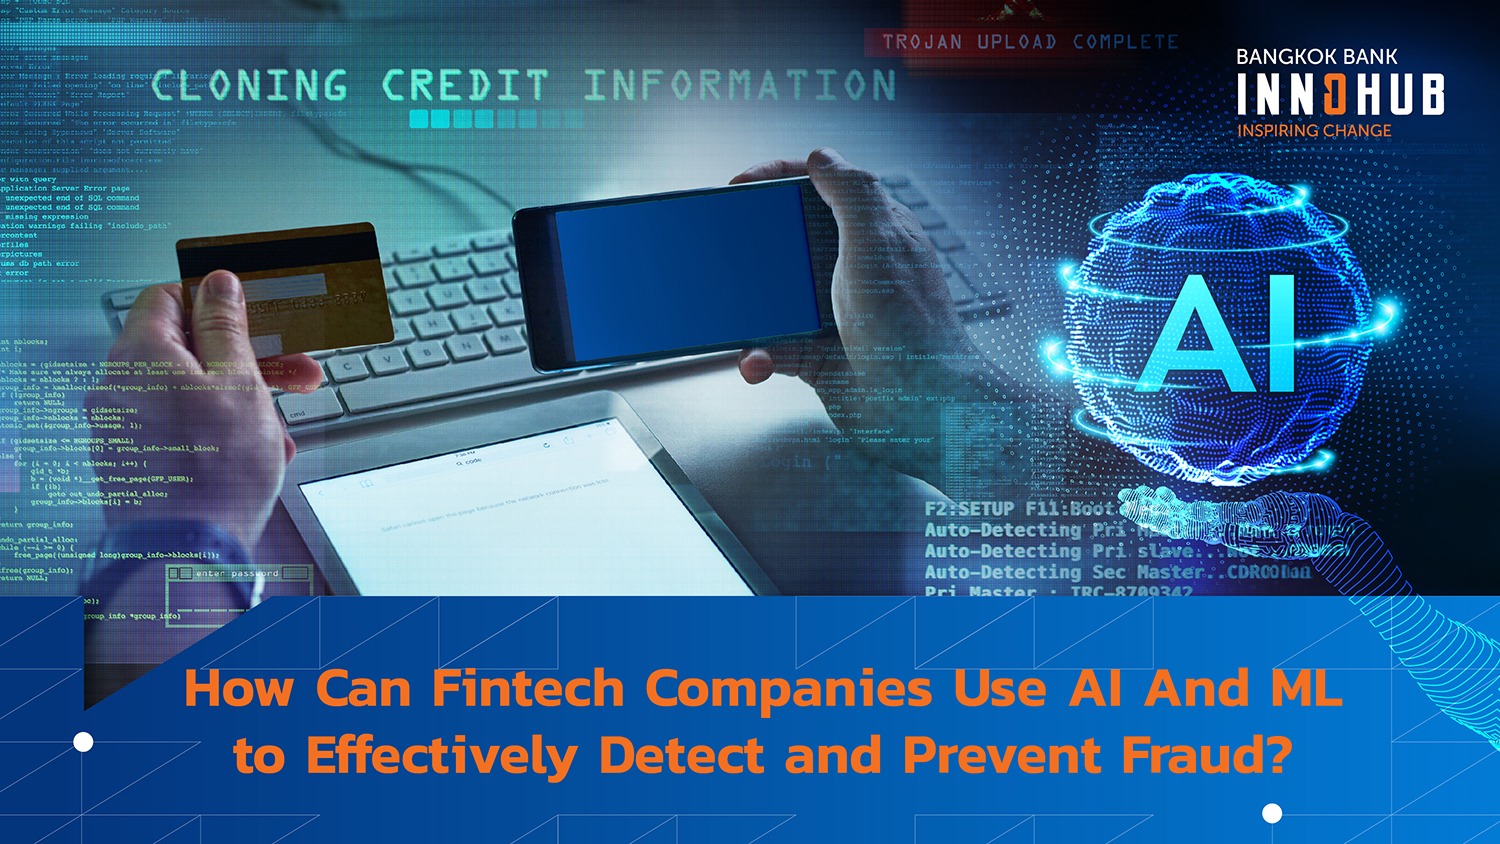 How Can Fintech Companies Use AI And ML to Effectively Detect and Prevent Fraud?